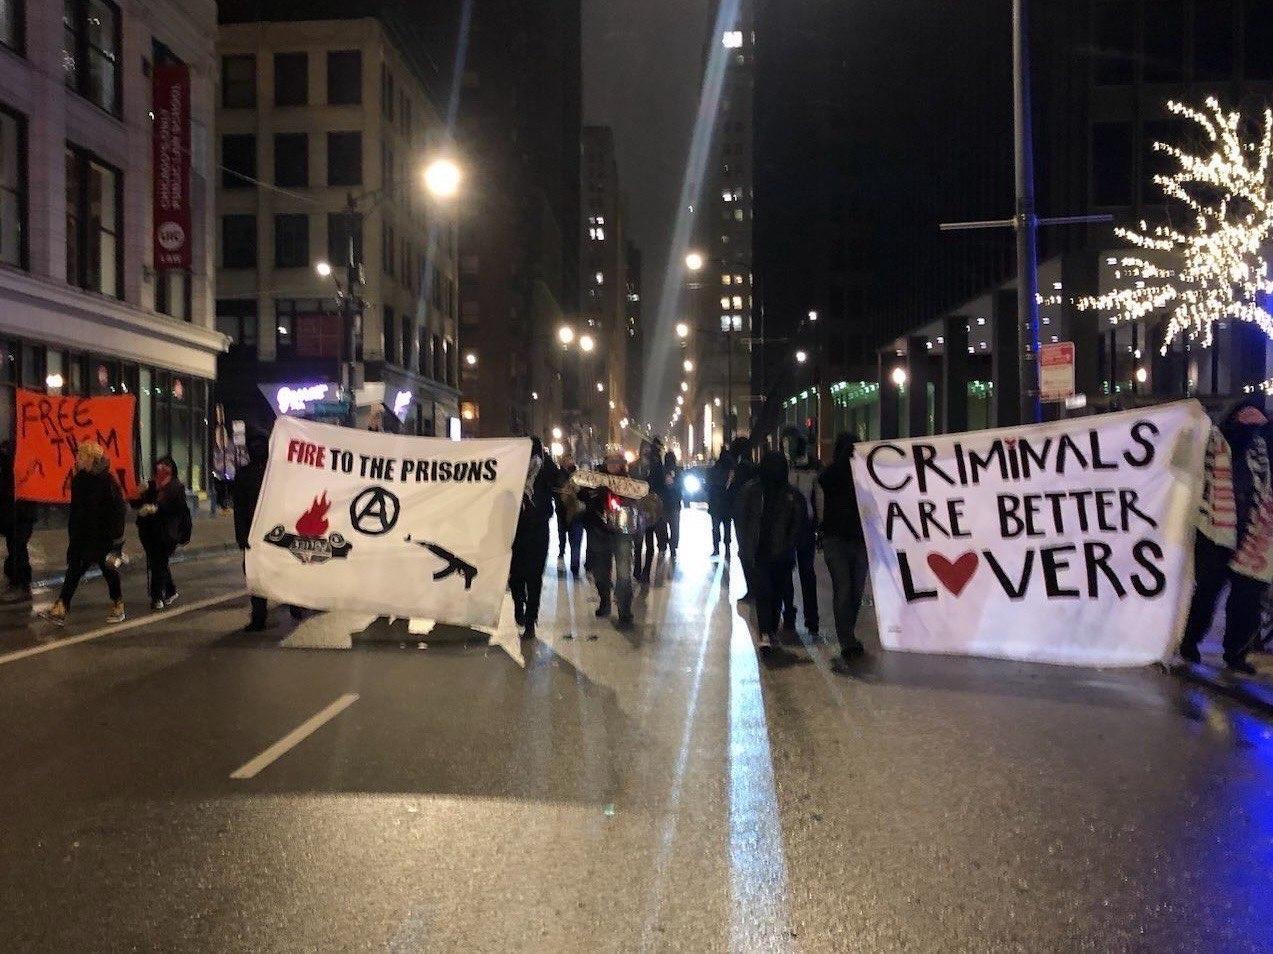 A crowd marches in the street holding banners reading "criminals are better lovers" and "fire to the prisons" with images of a burning cop car, ak-47, and circle-a